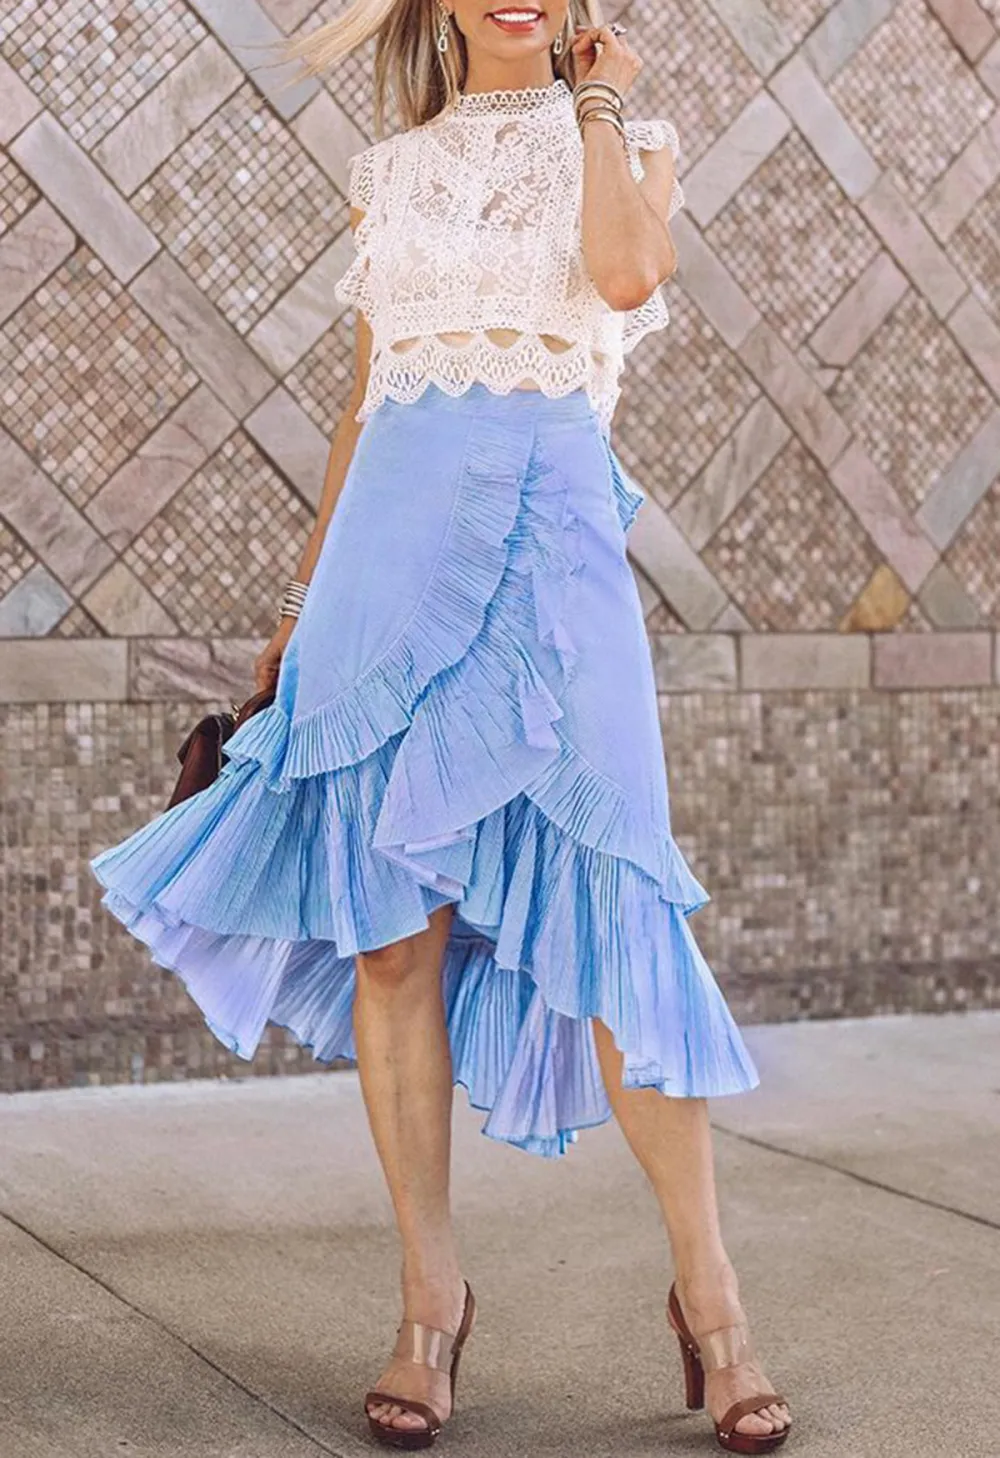 APPLAUSE OF RUFFLE TIERED FRILL HEM SKIRT IN BLUE STRIPES